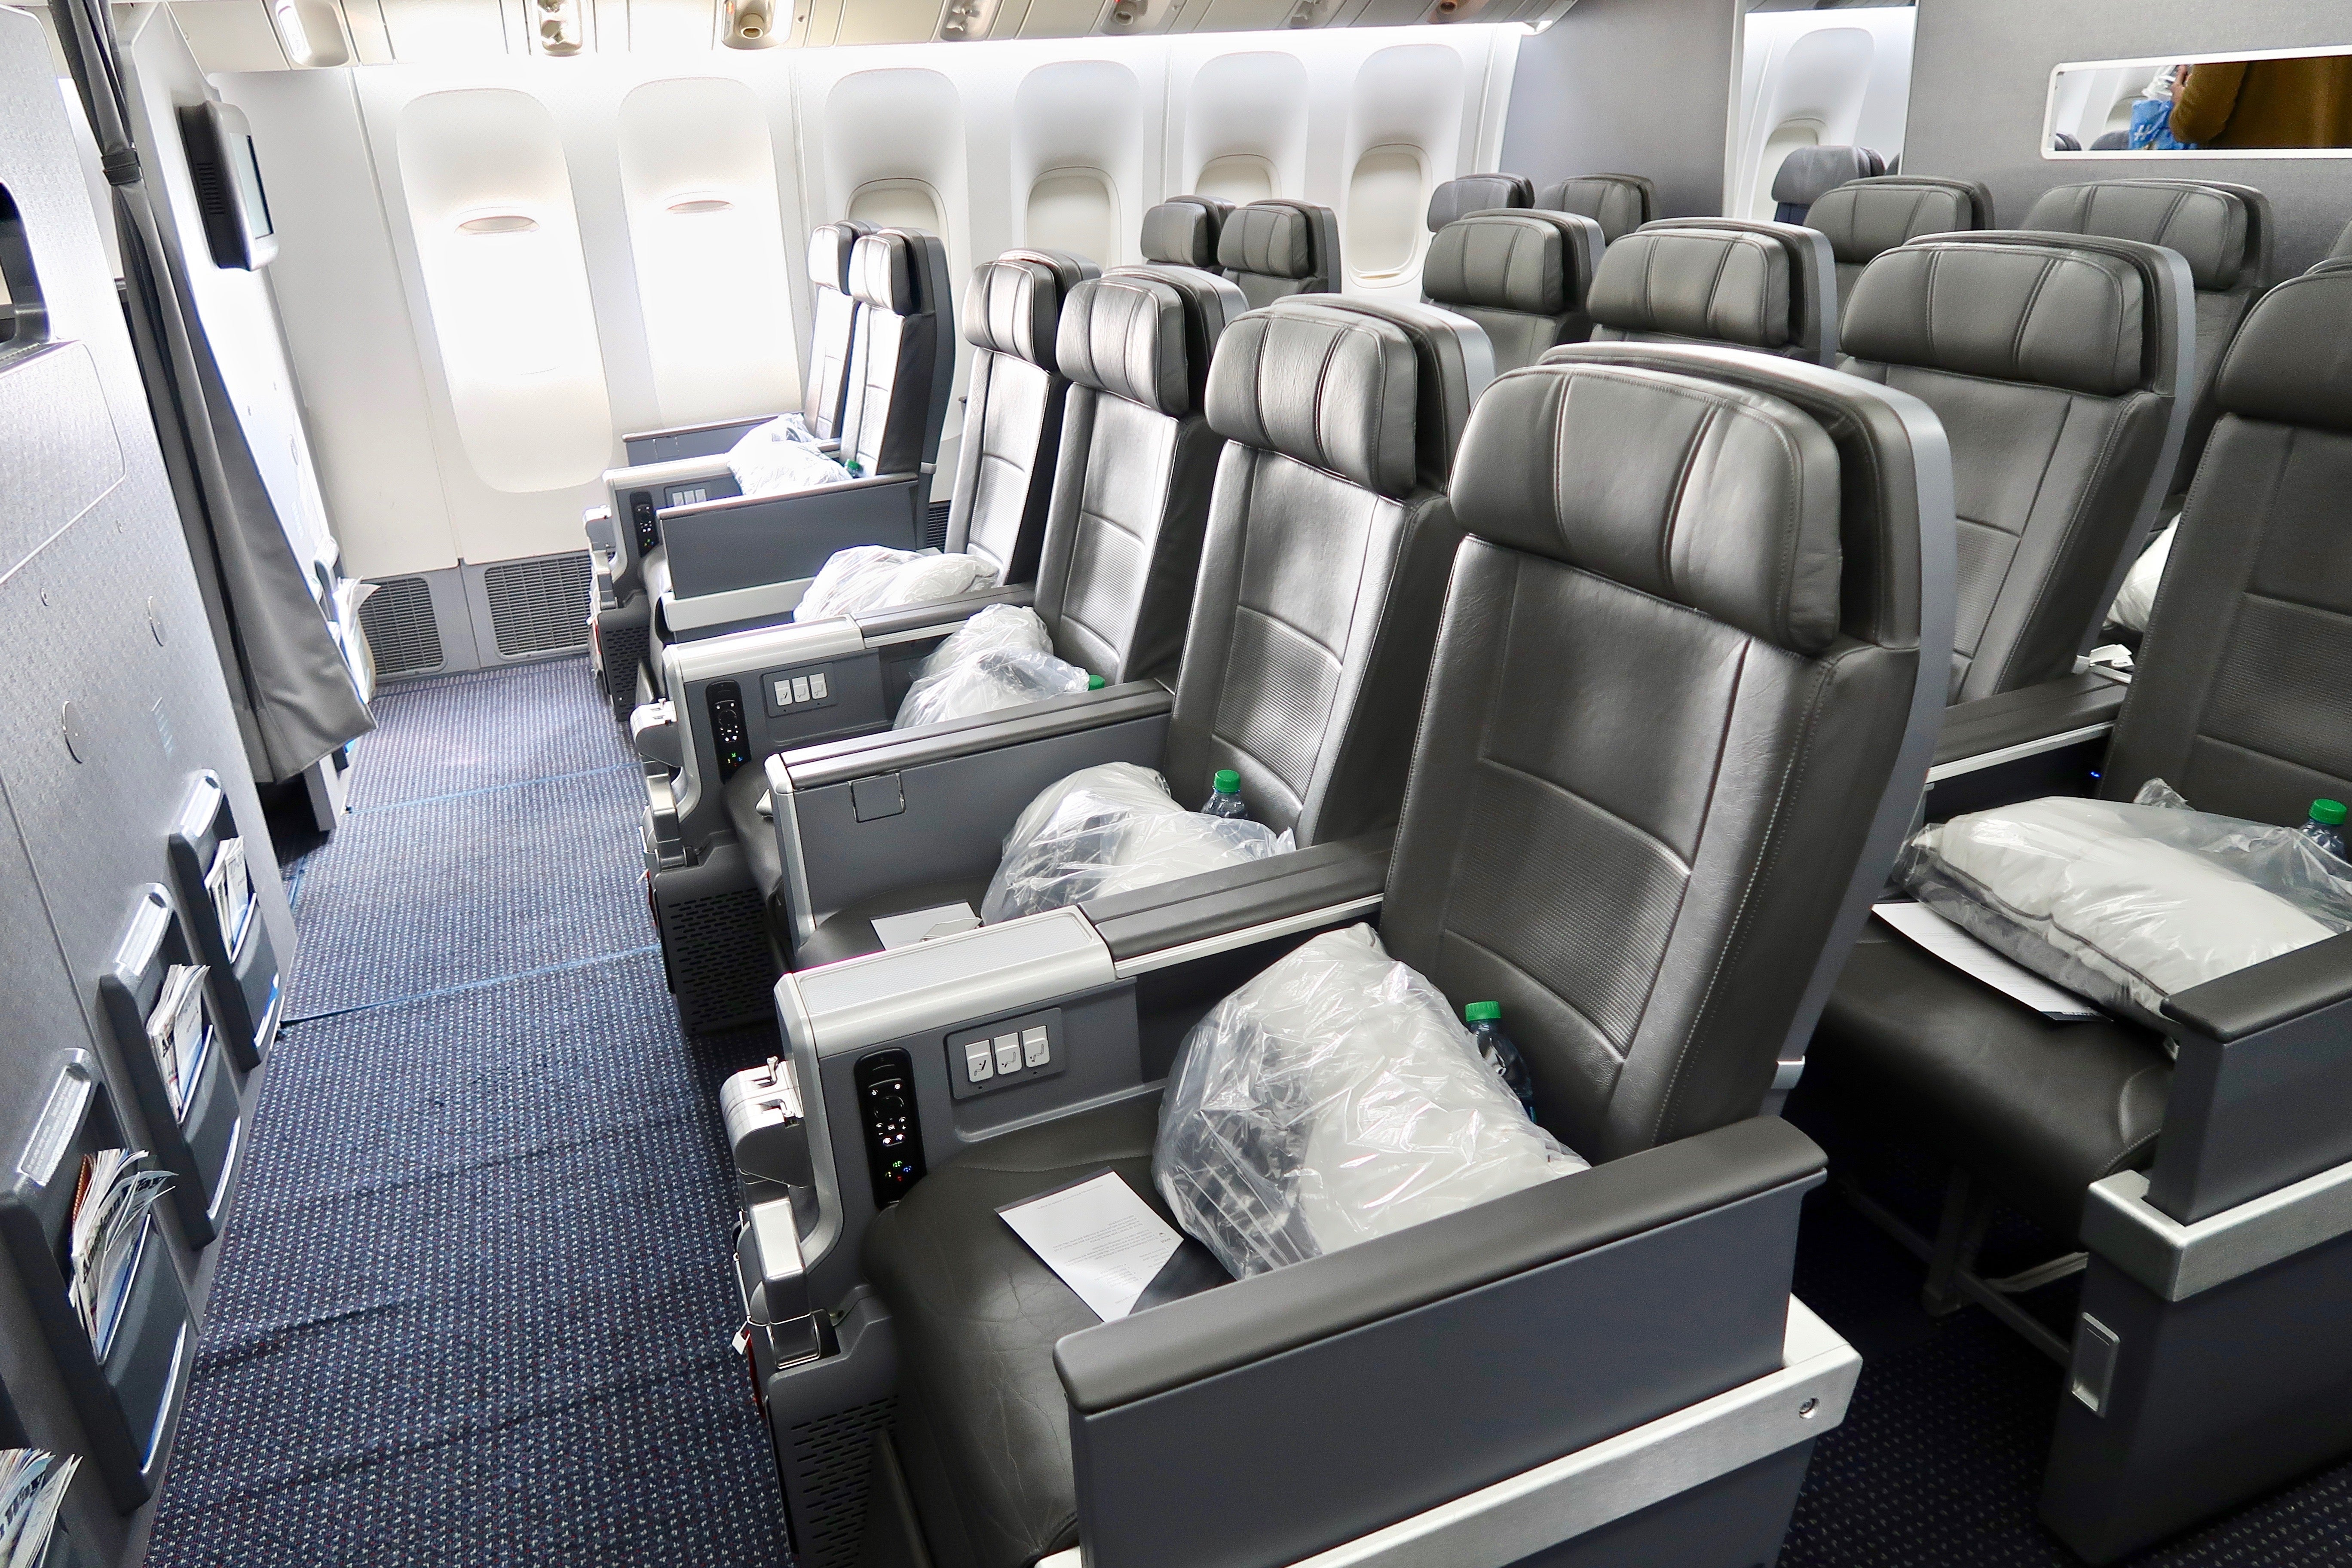 How to upgrade to premium economy without breaking the bank and more news from this week